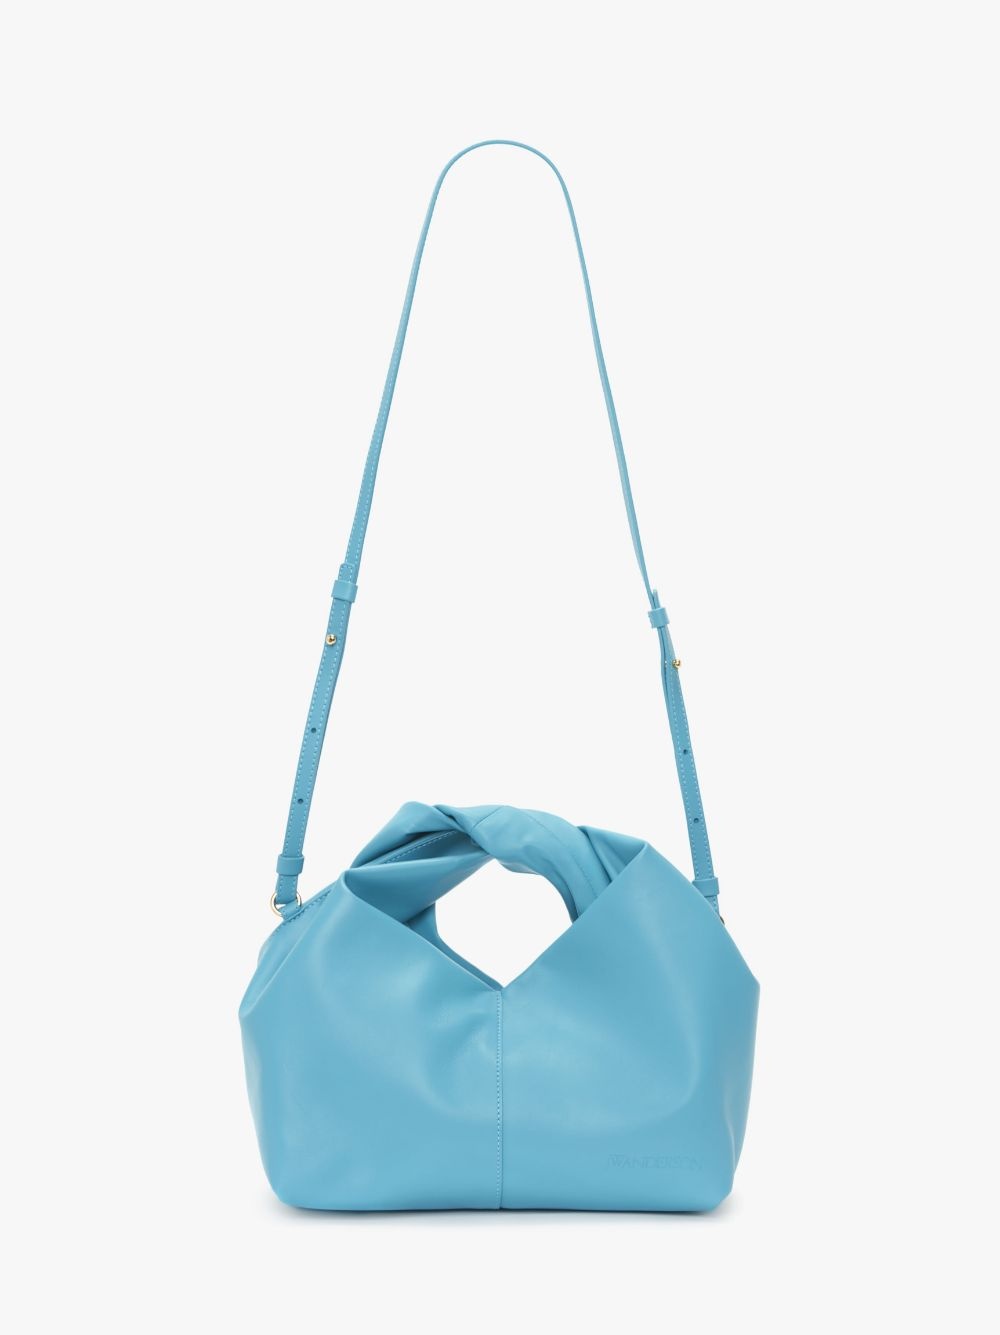 MINI TWISTER HOBO WITH STRAP - LEATHER CROSSBODY BAG - 5